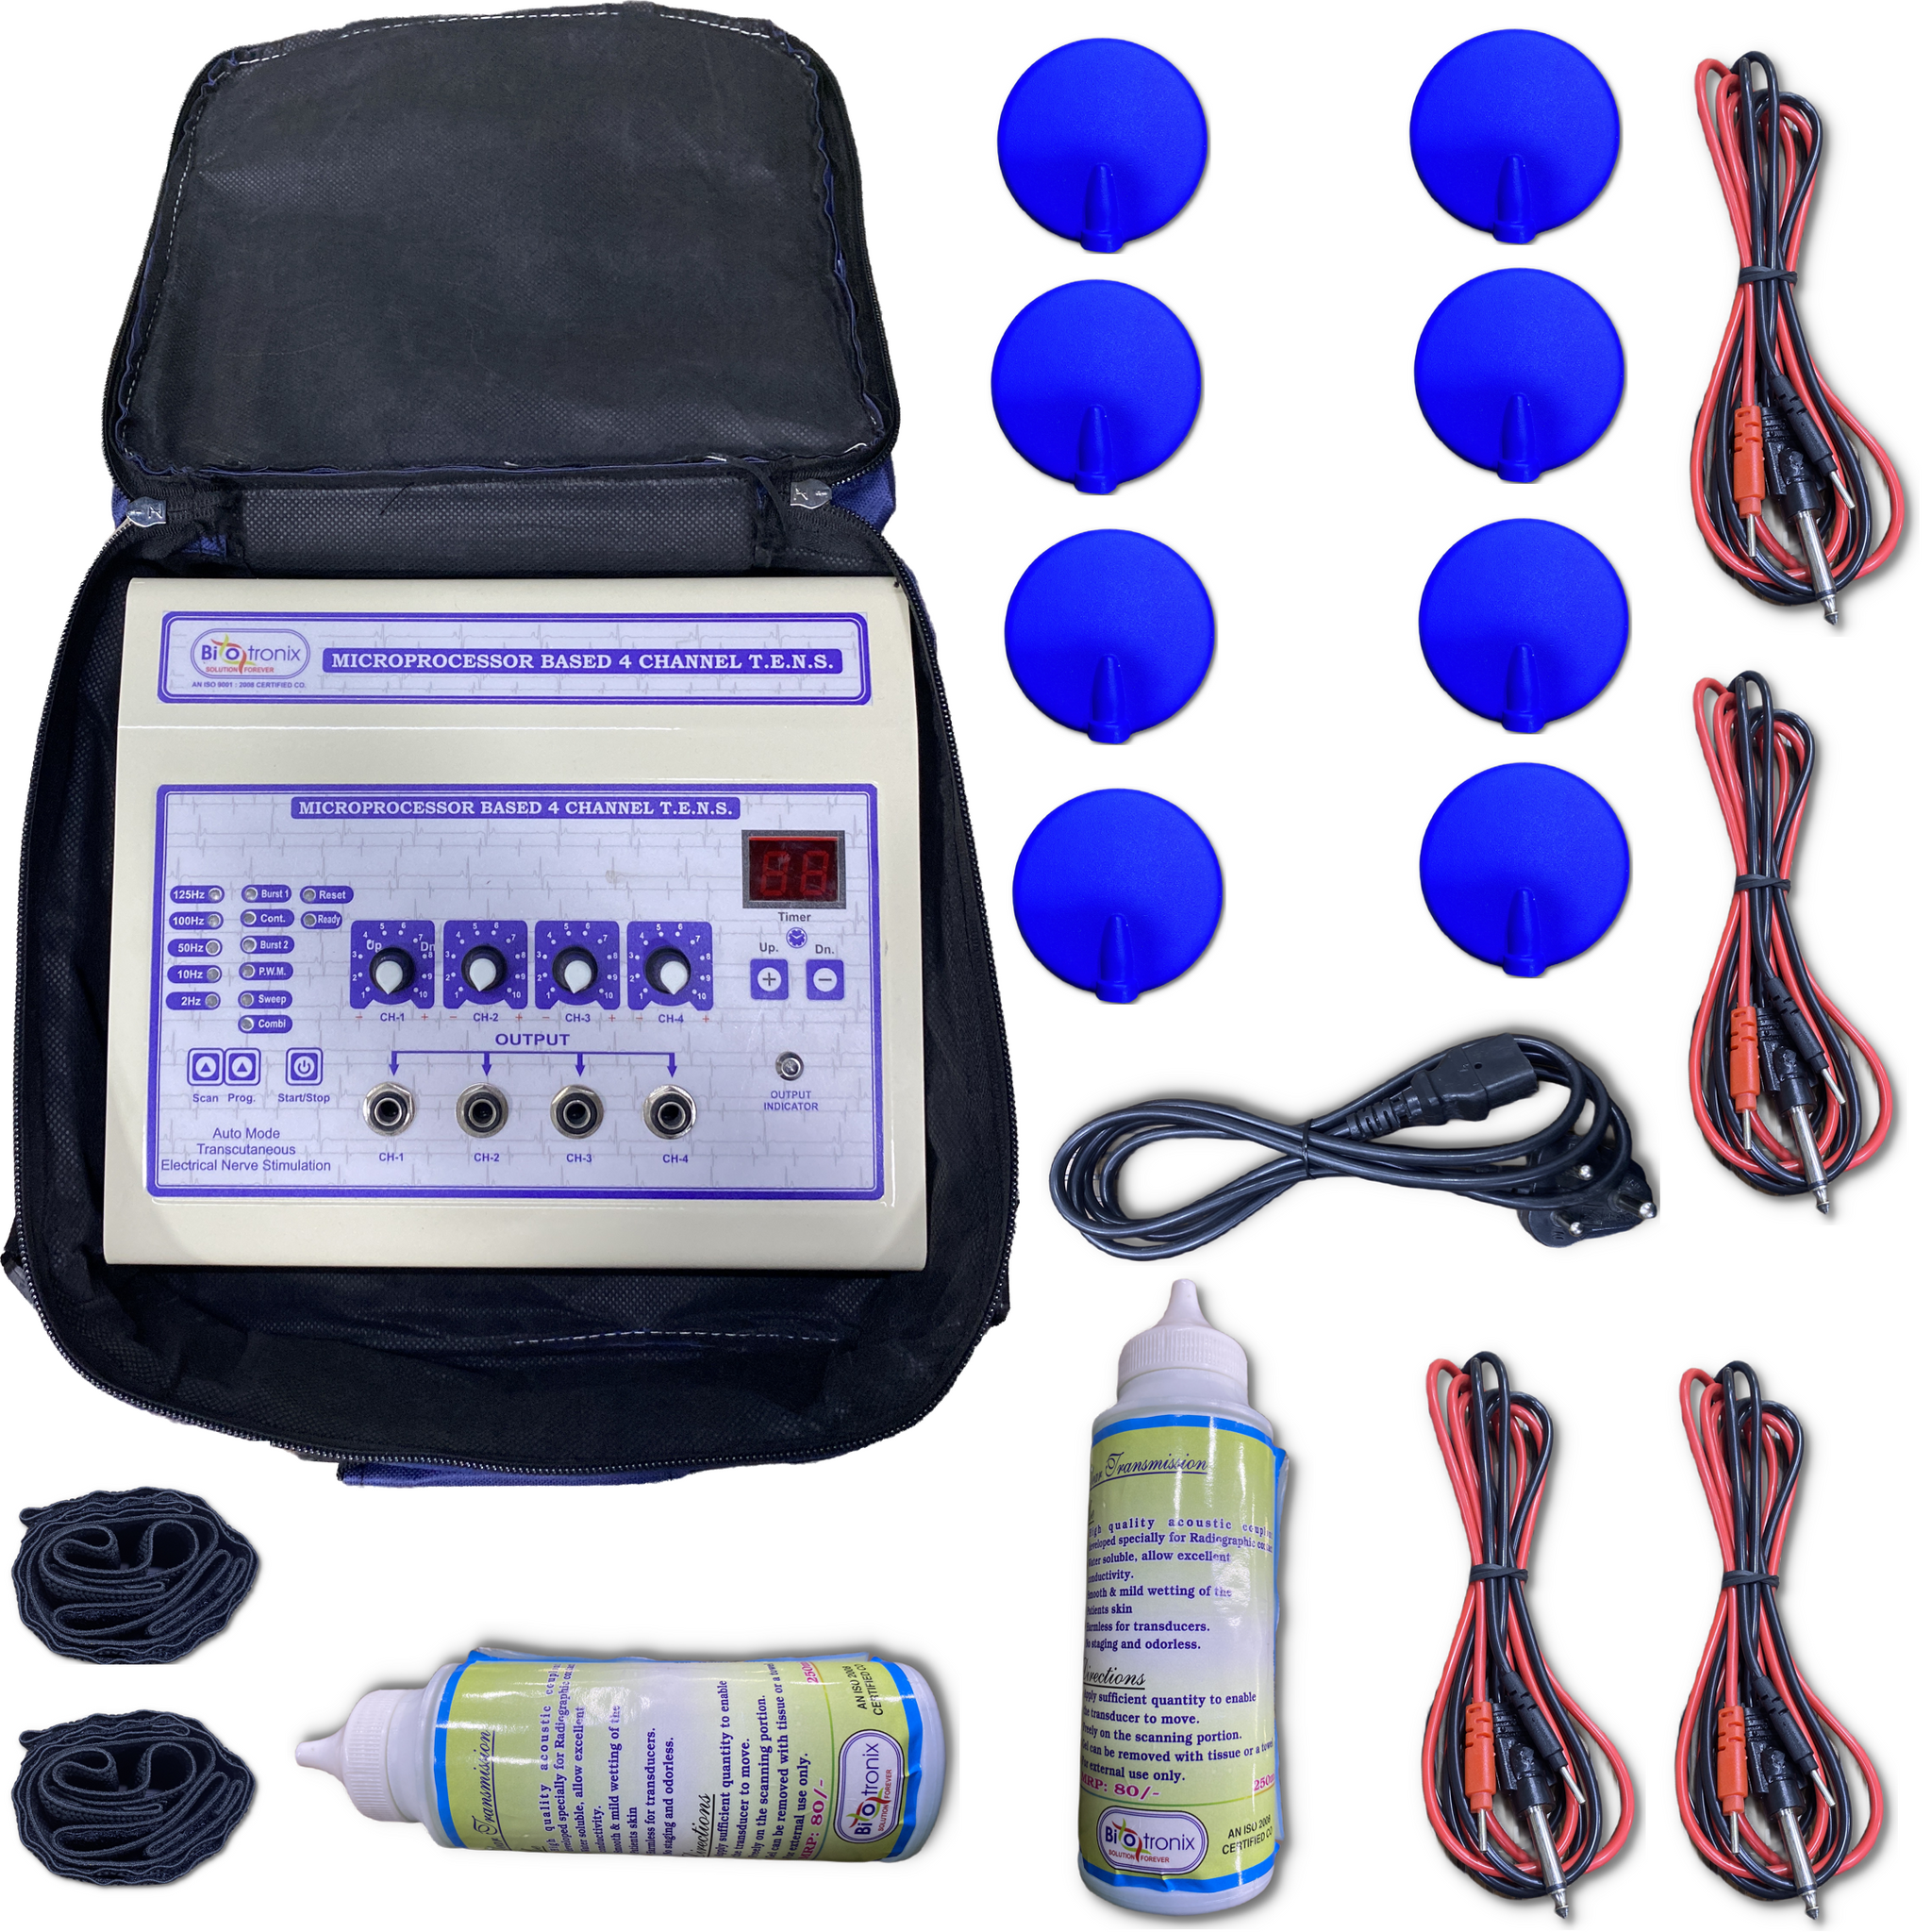 ACCO 4 Channel Tens Muscle Stimulator Machine for Pain Relief